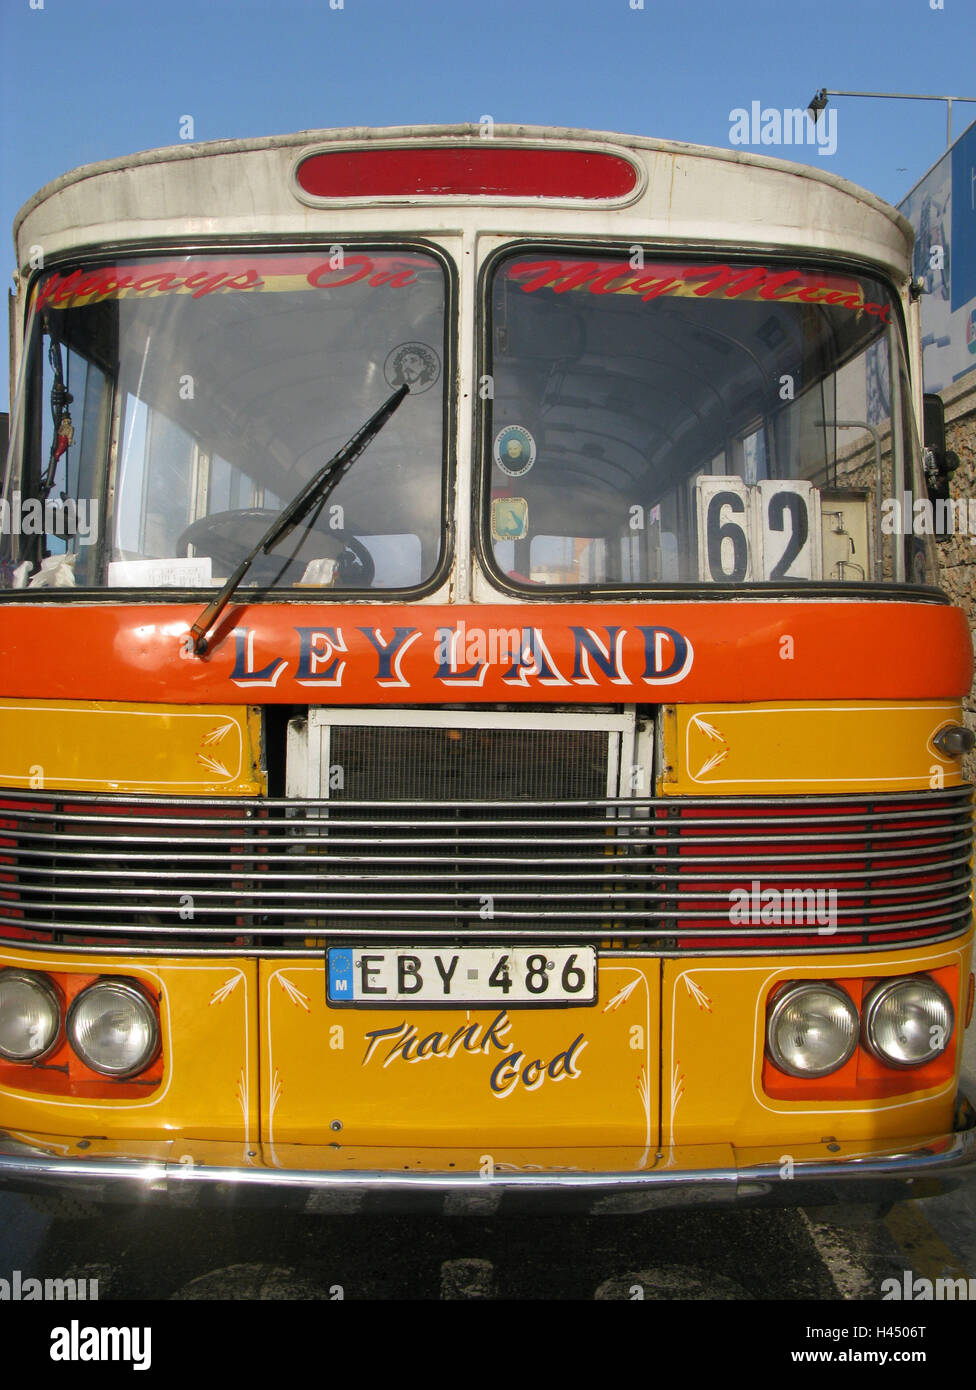 Bus, detail, radiator grille, number plate, stroke, Leyland, no property release, vehicle, means transportation, publicly, regular bus, bus traffic, short-distance traffic, transport, personal transport, promotion, transportation human beings, tourism, vehicle mark, old-timer, yellow, Malta, coach, Stock Photo